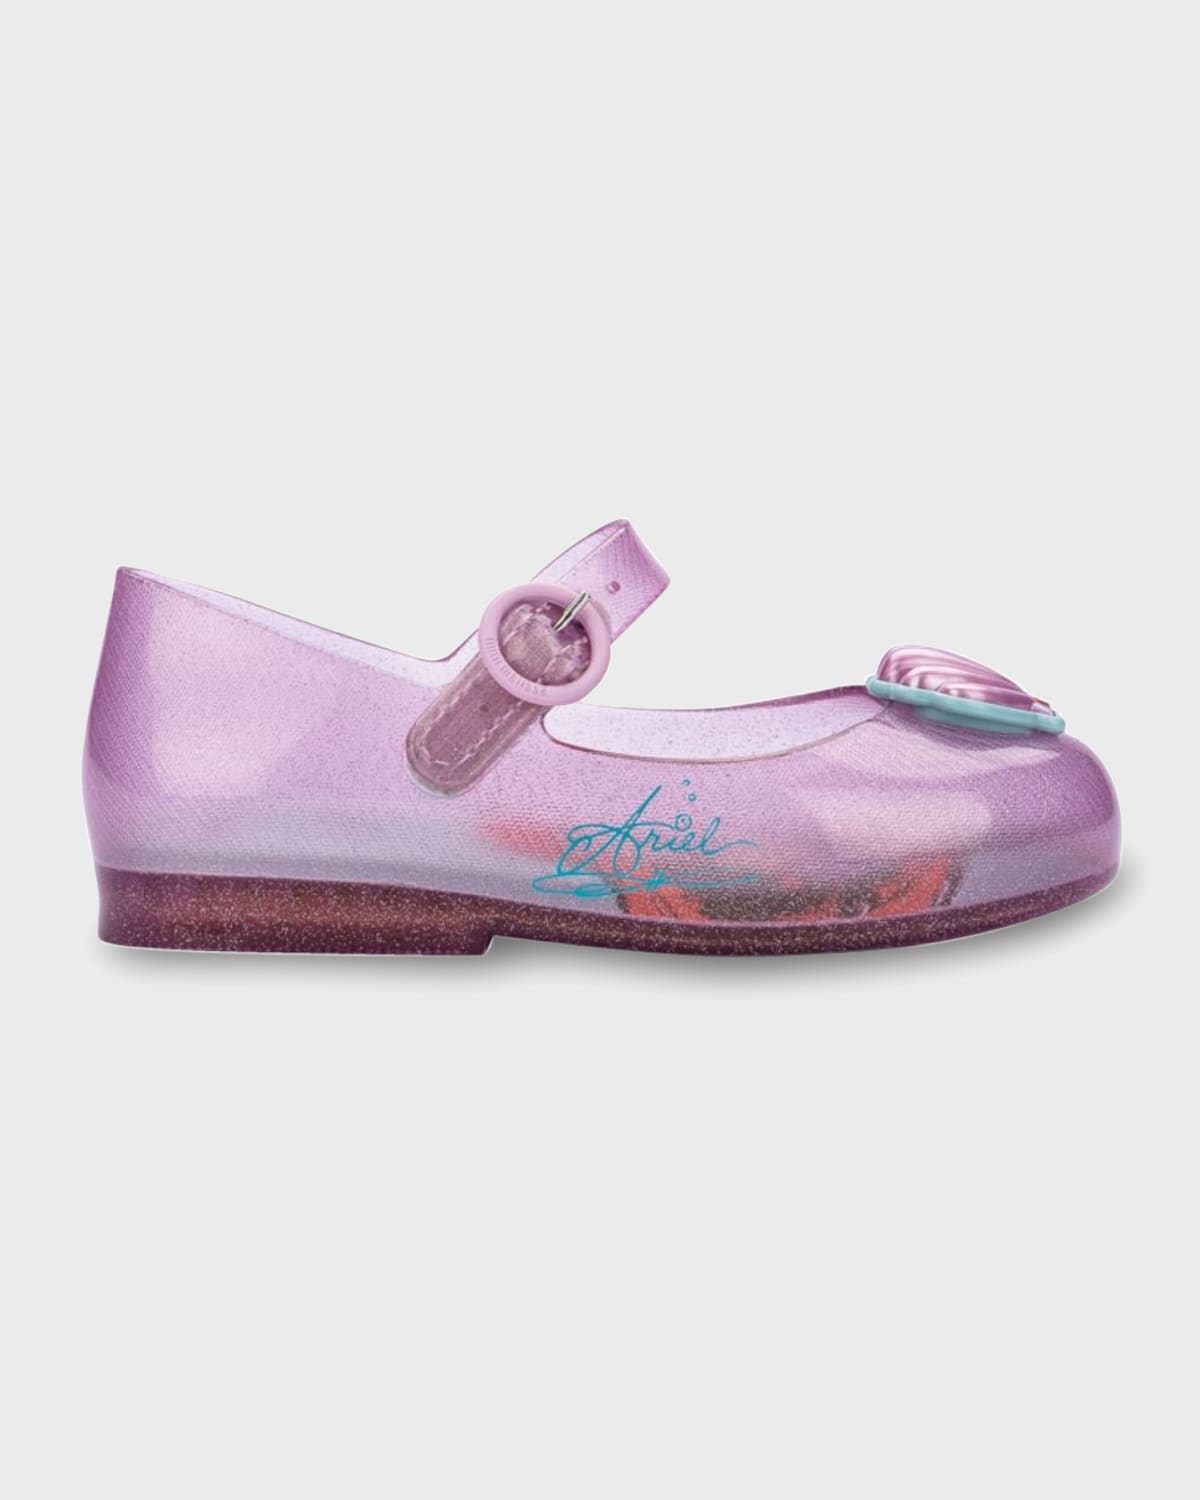 Melissa Girl's Sweet Love X Disney Princess Mary Jane Shoes, Toddlers/kids In Pink